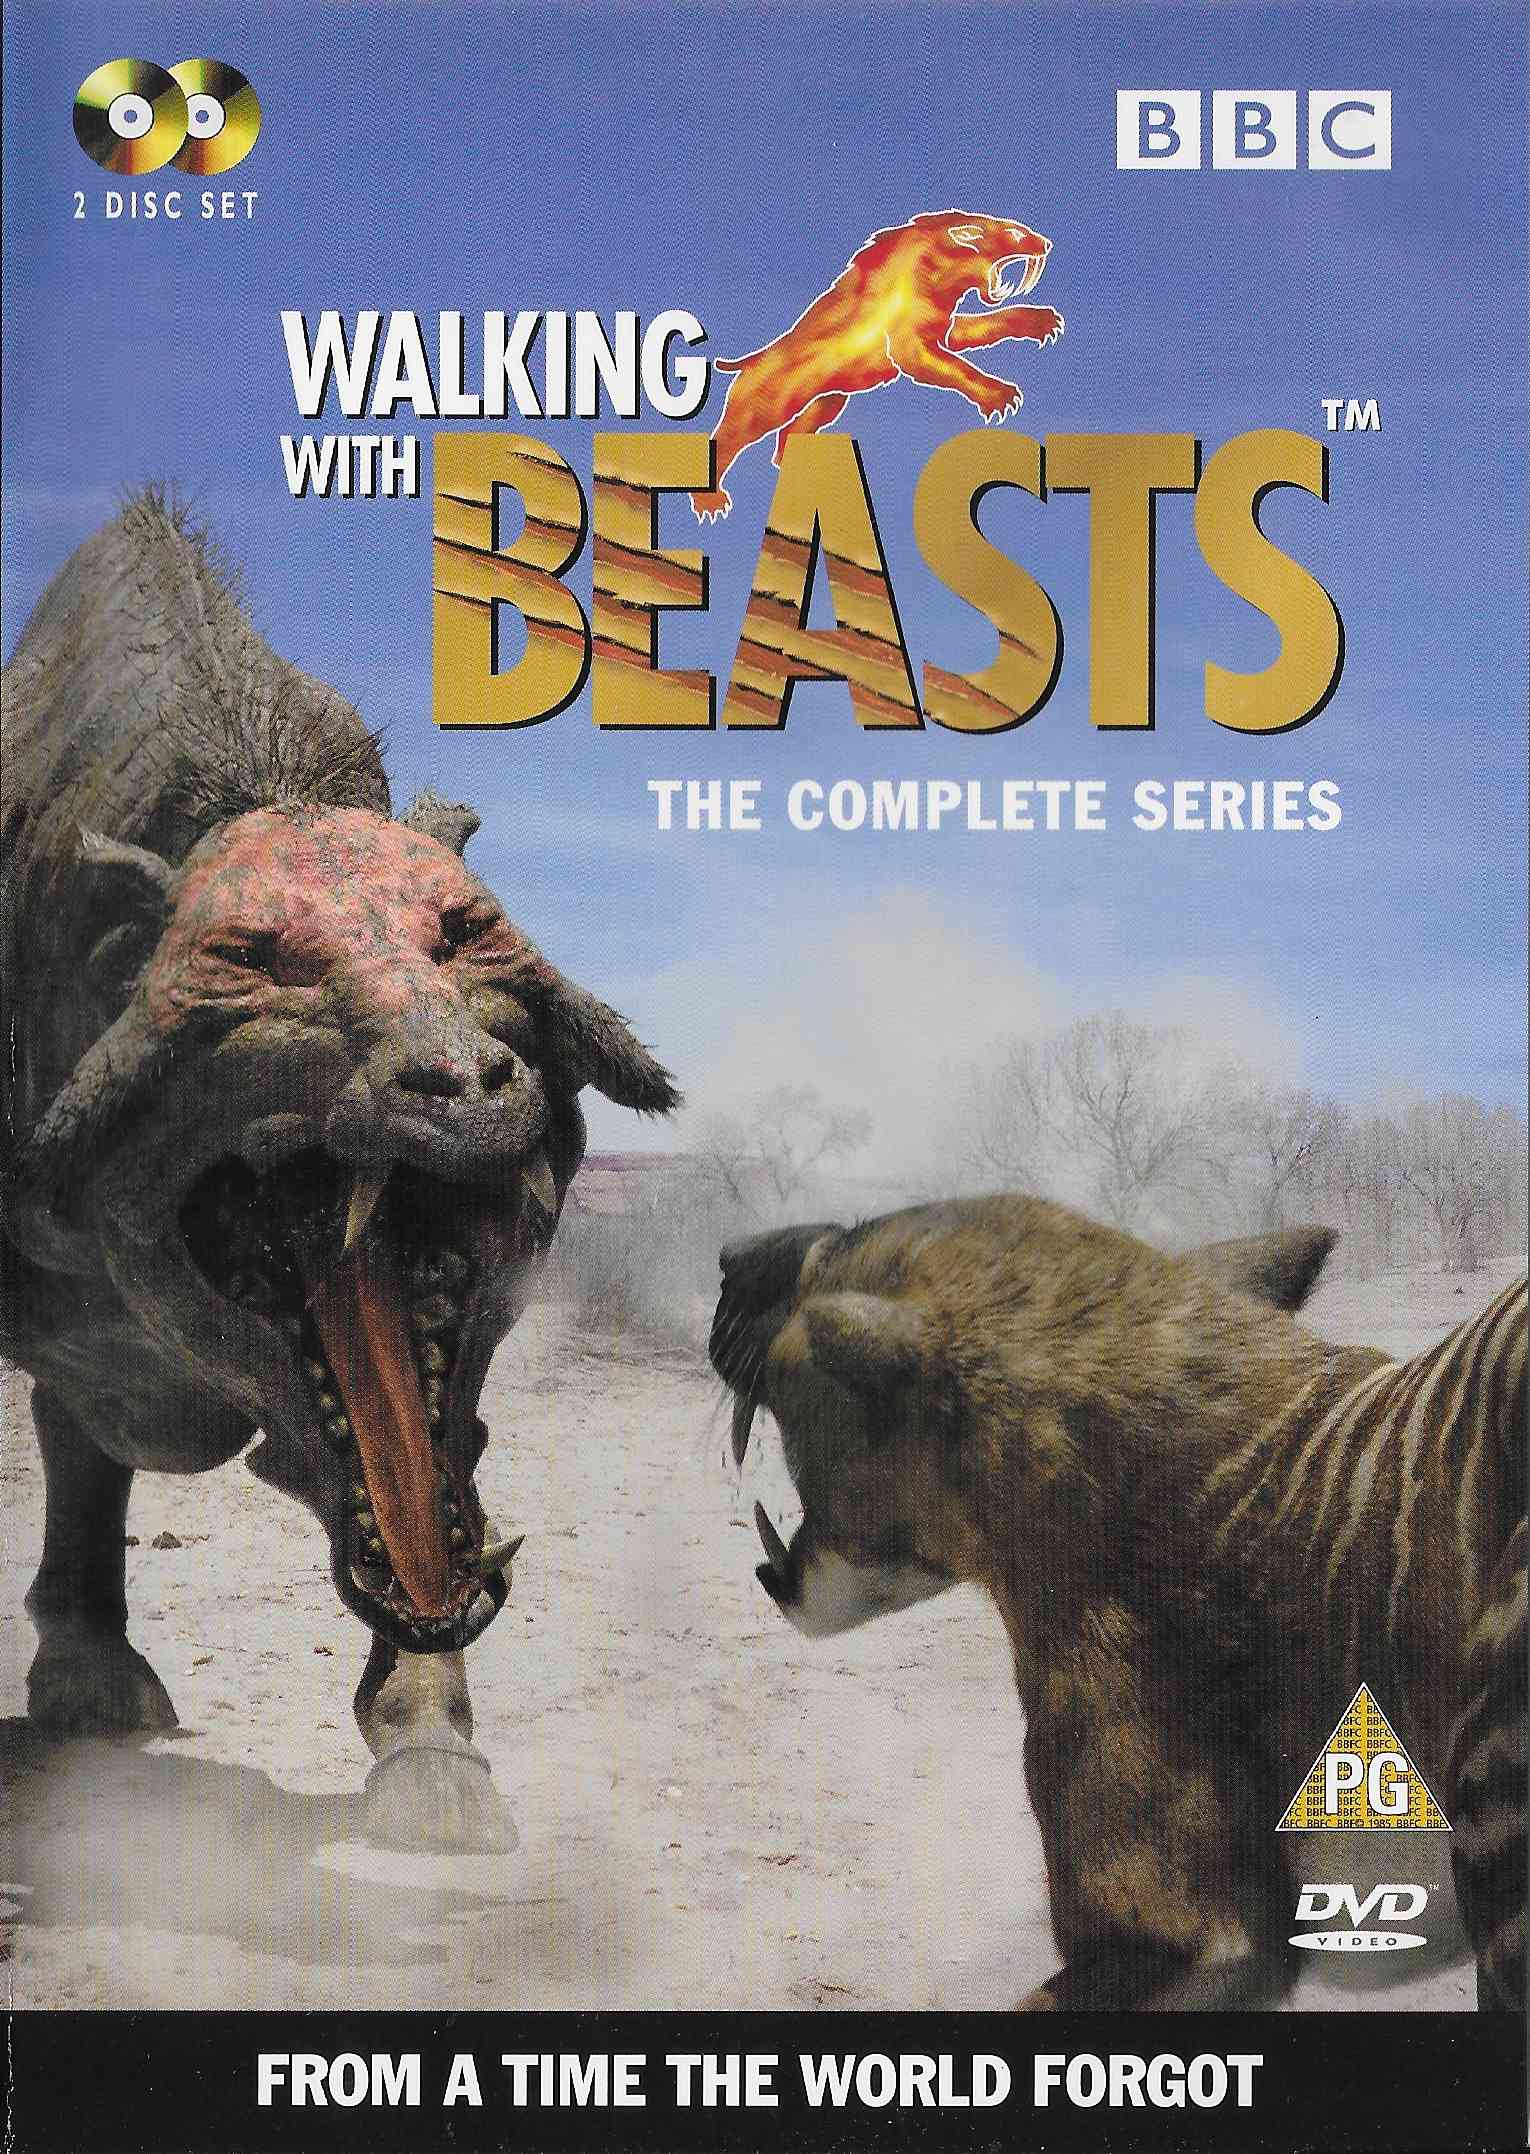 Picture of BBCDVD 1101 Walking with beasts by artist Unknown from the BBC dvds - Records and Tapes library